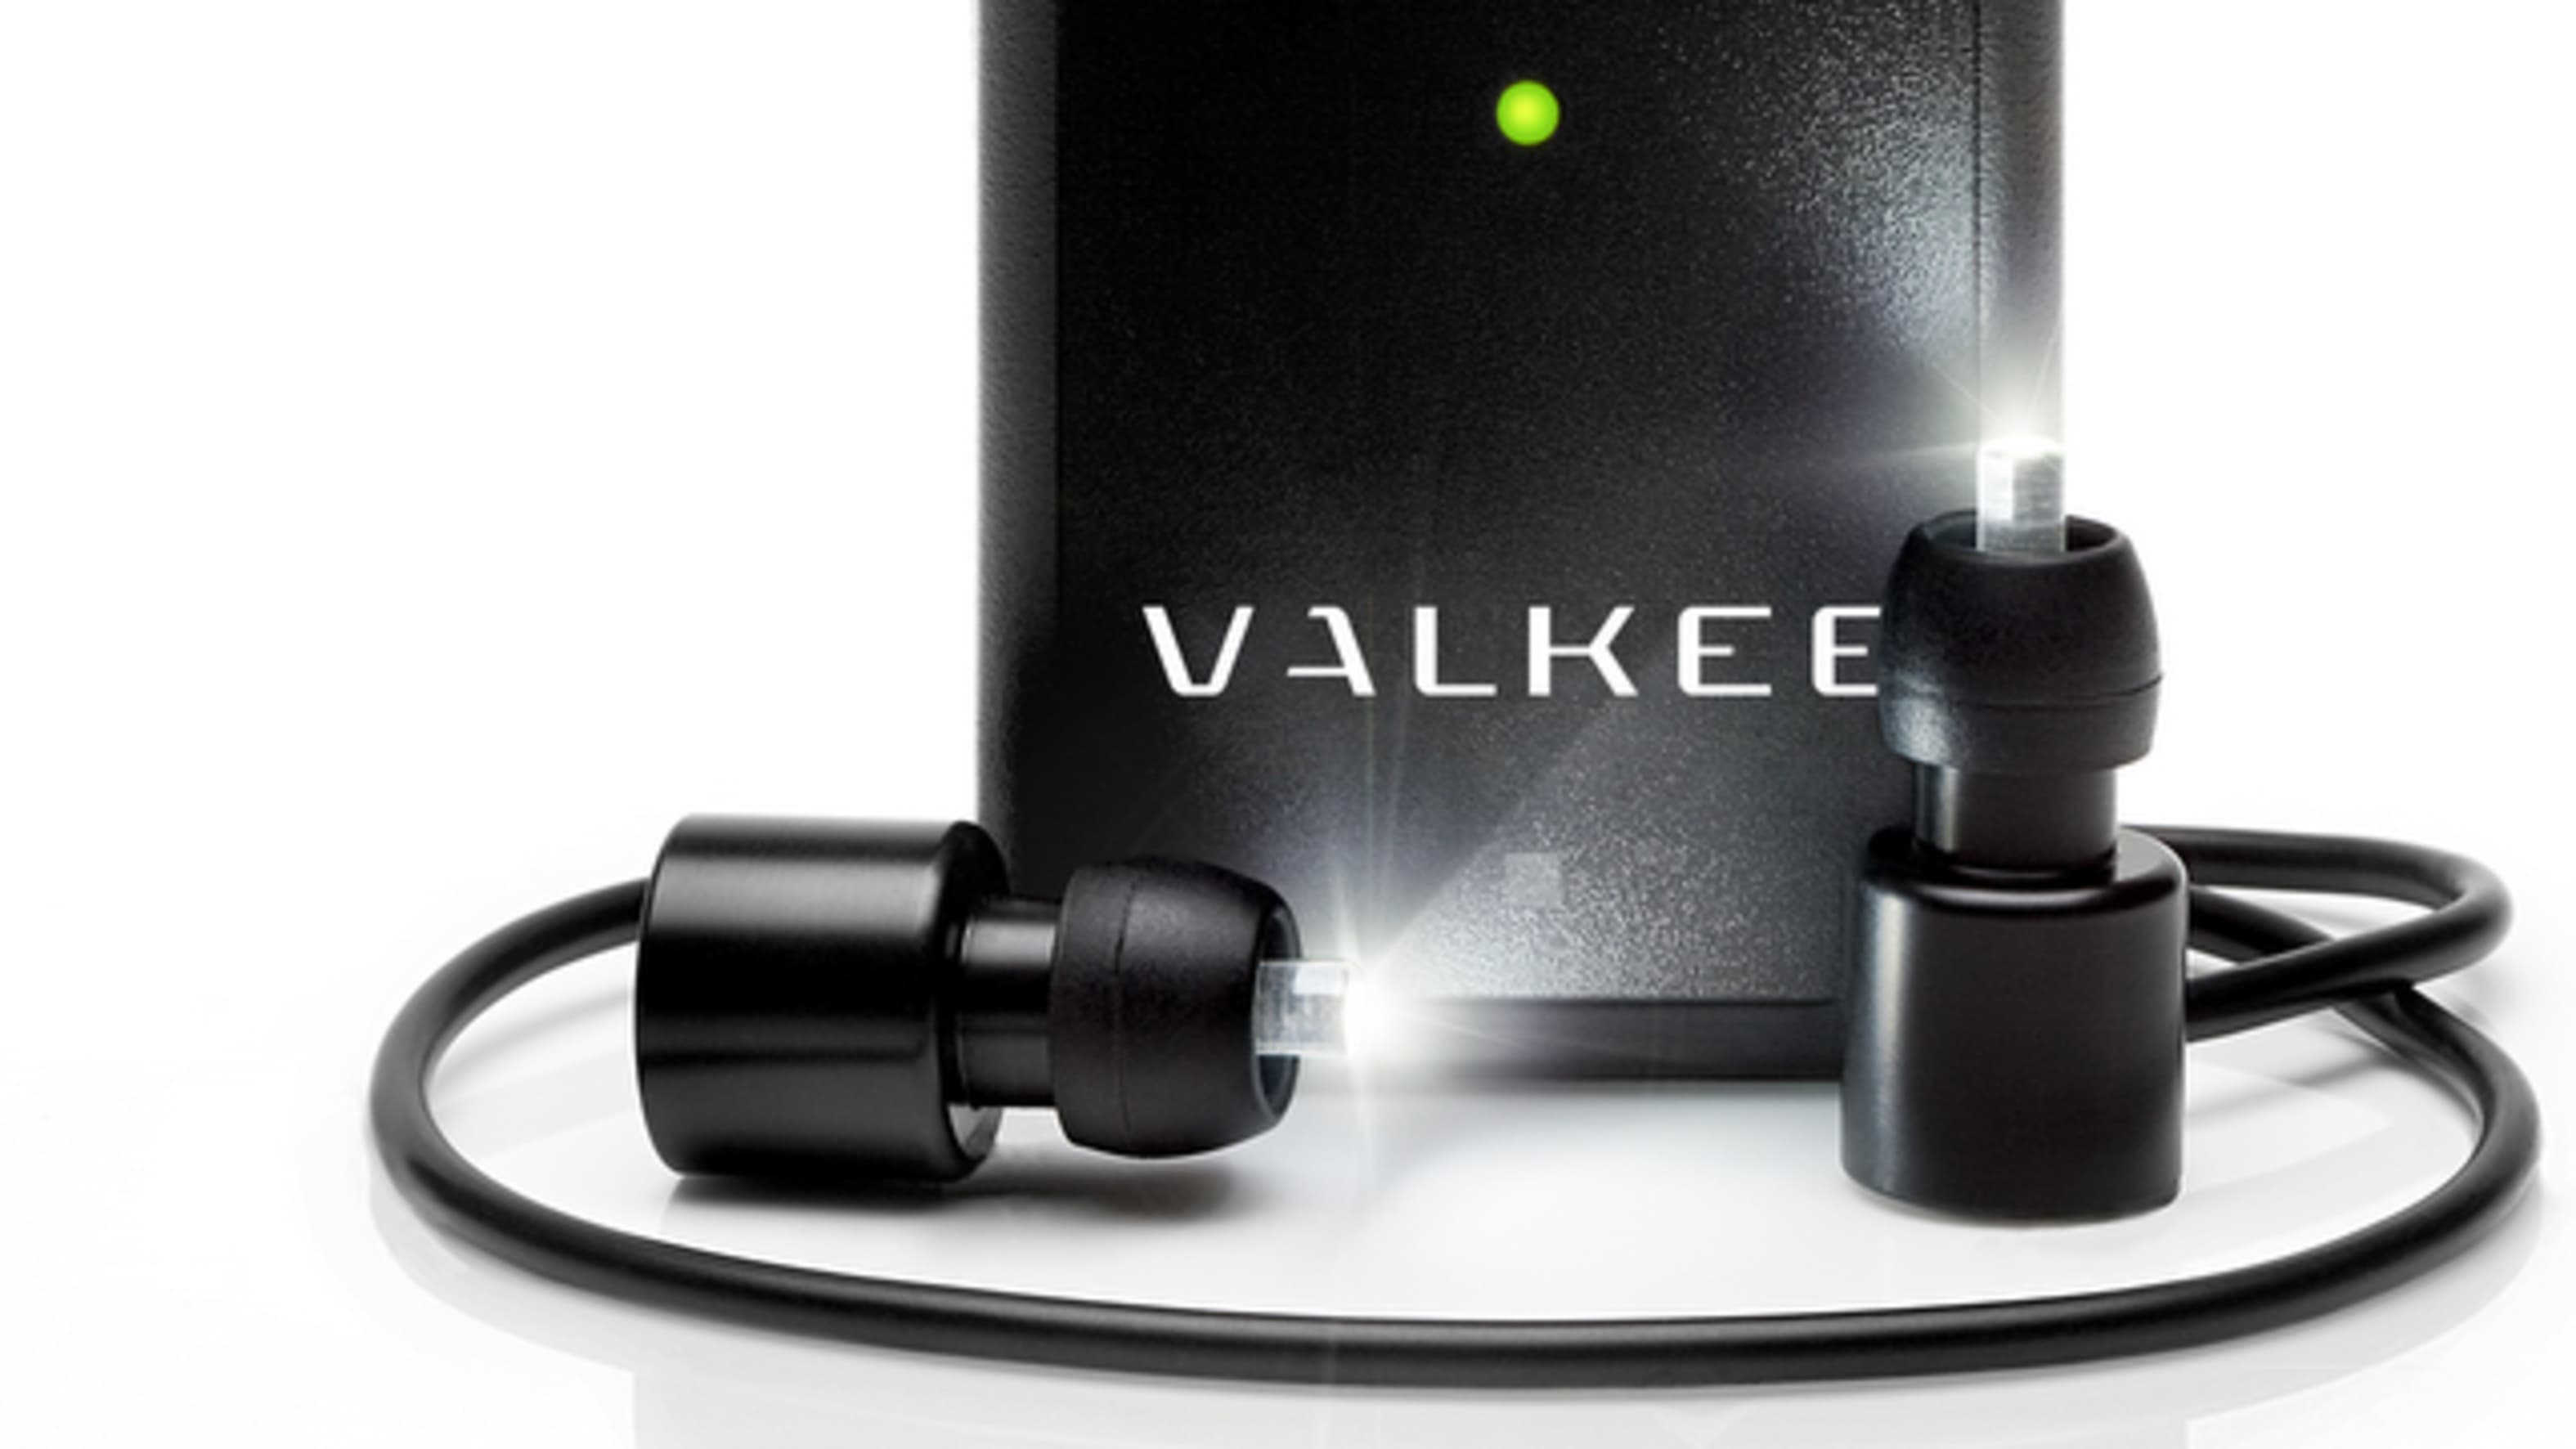 auktion gave Tilmeld Finnish 'ear light' firm Valkee files for bankruptcy | News | Yle Uutiset